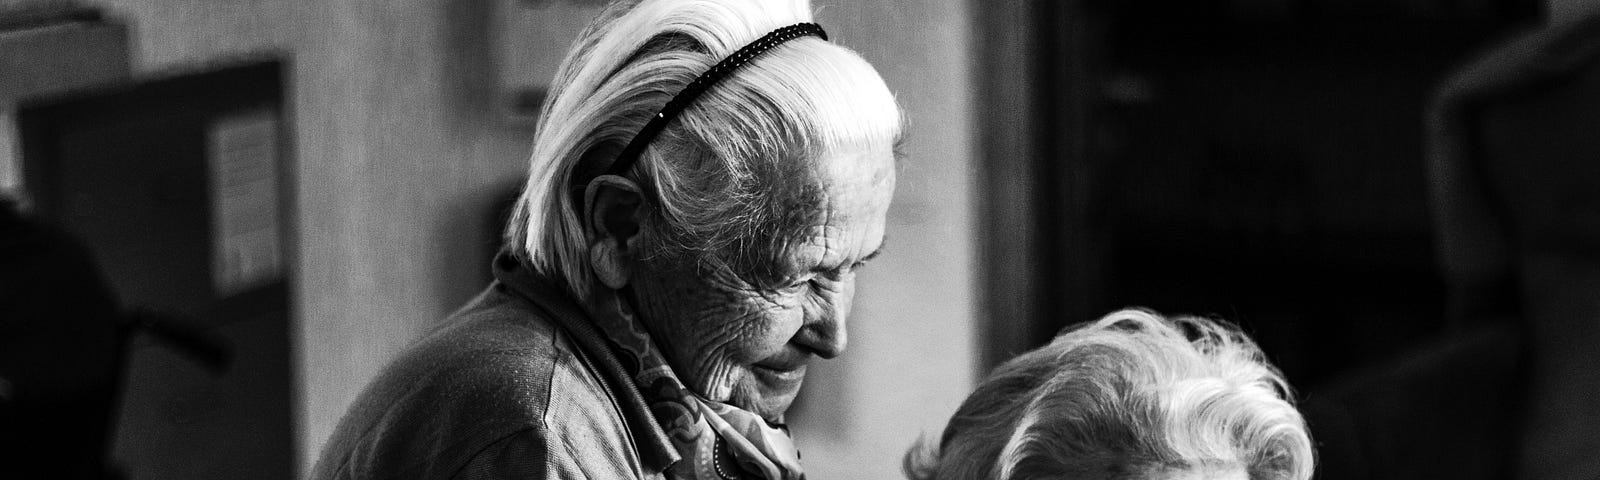 Black and white photo of two elderly women friends.